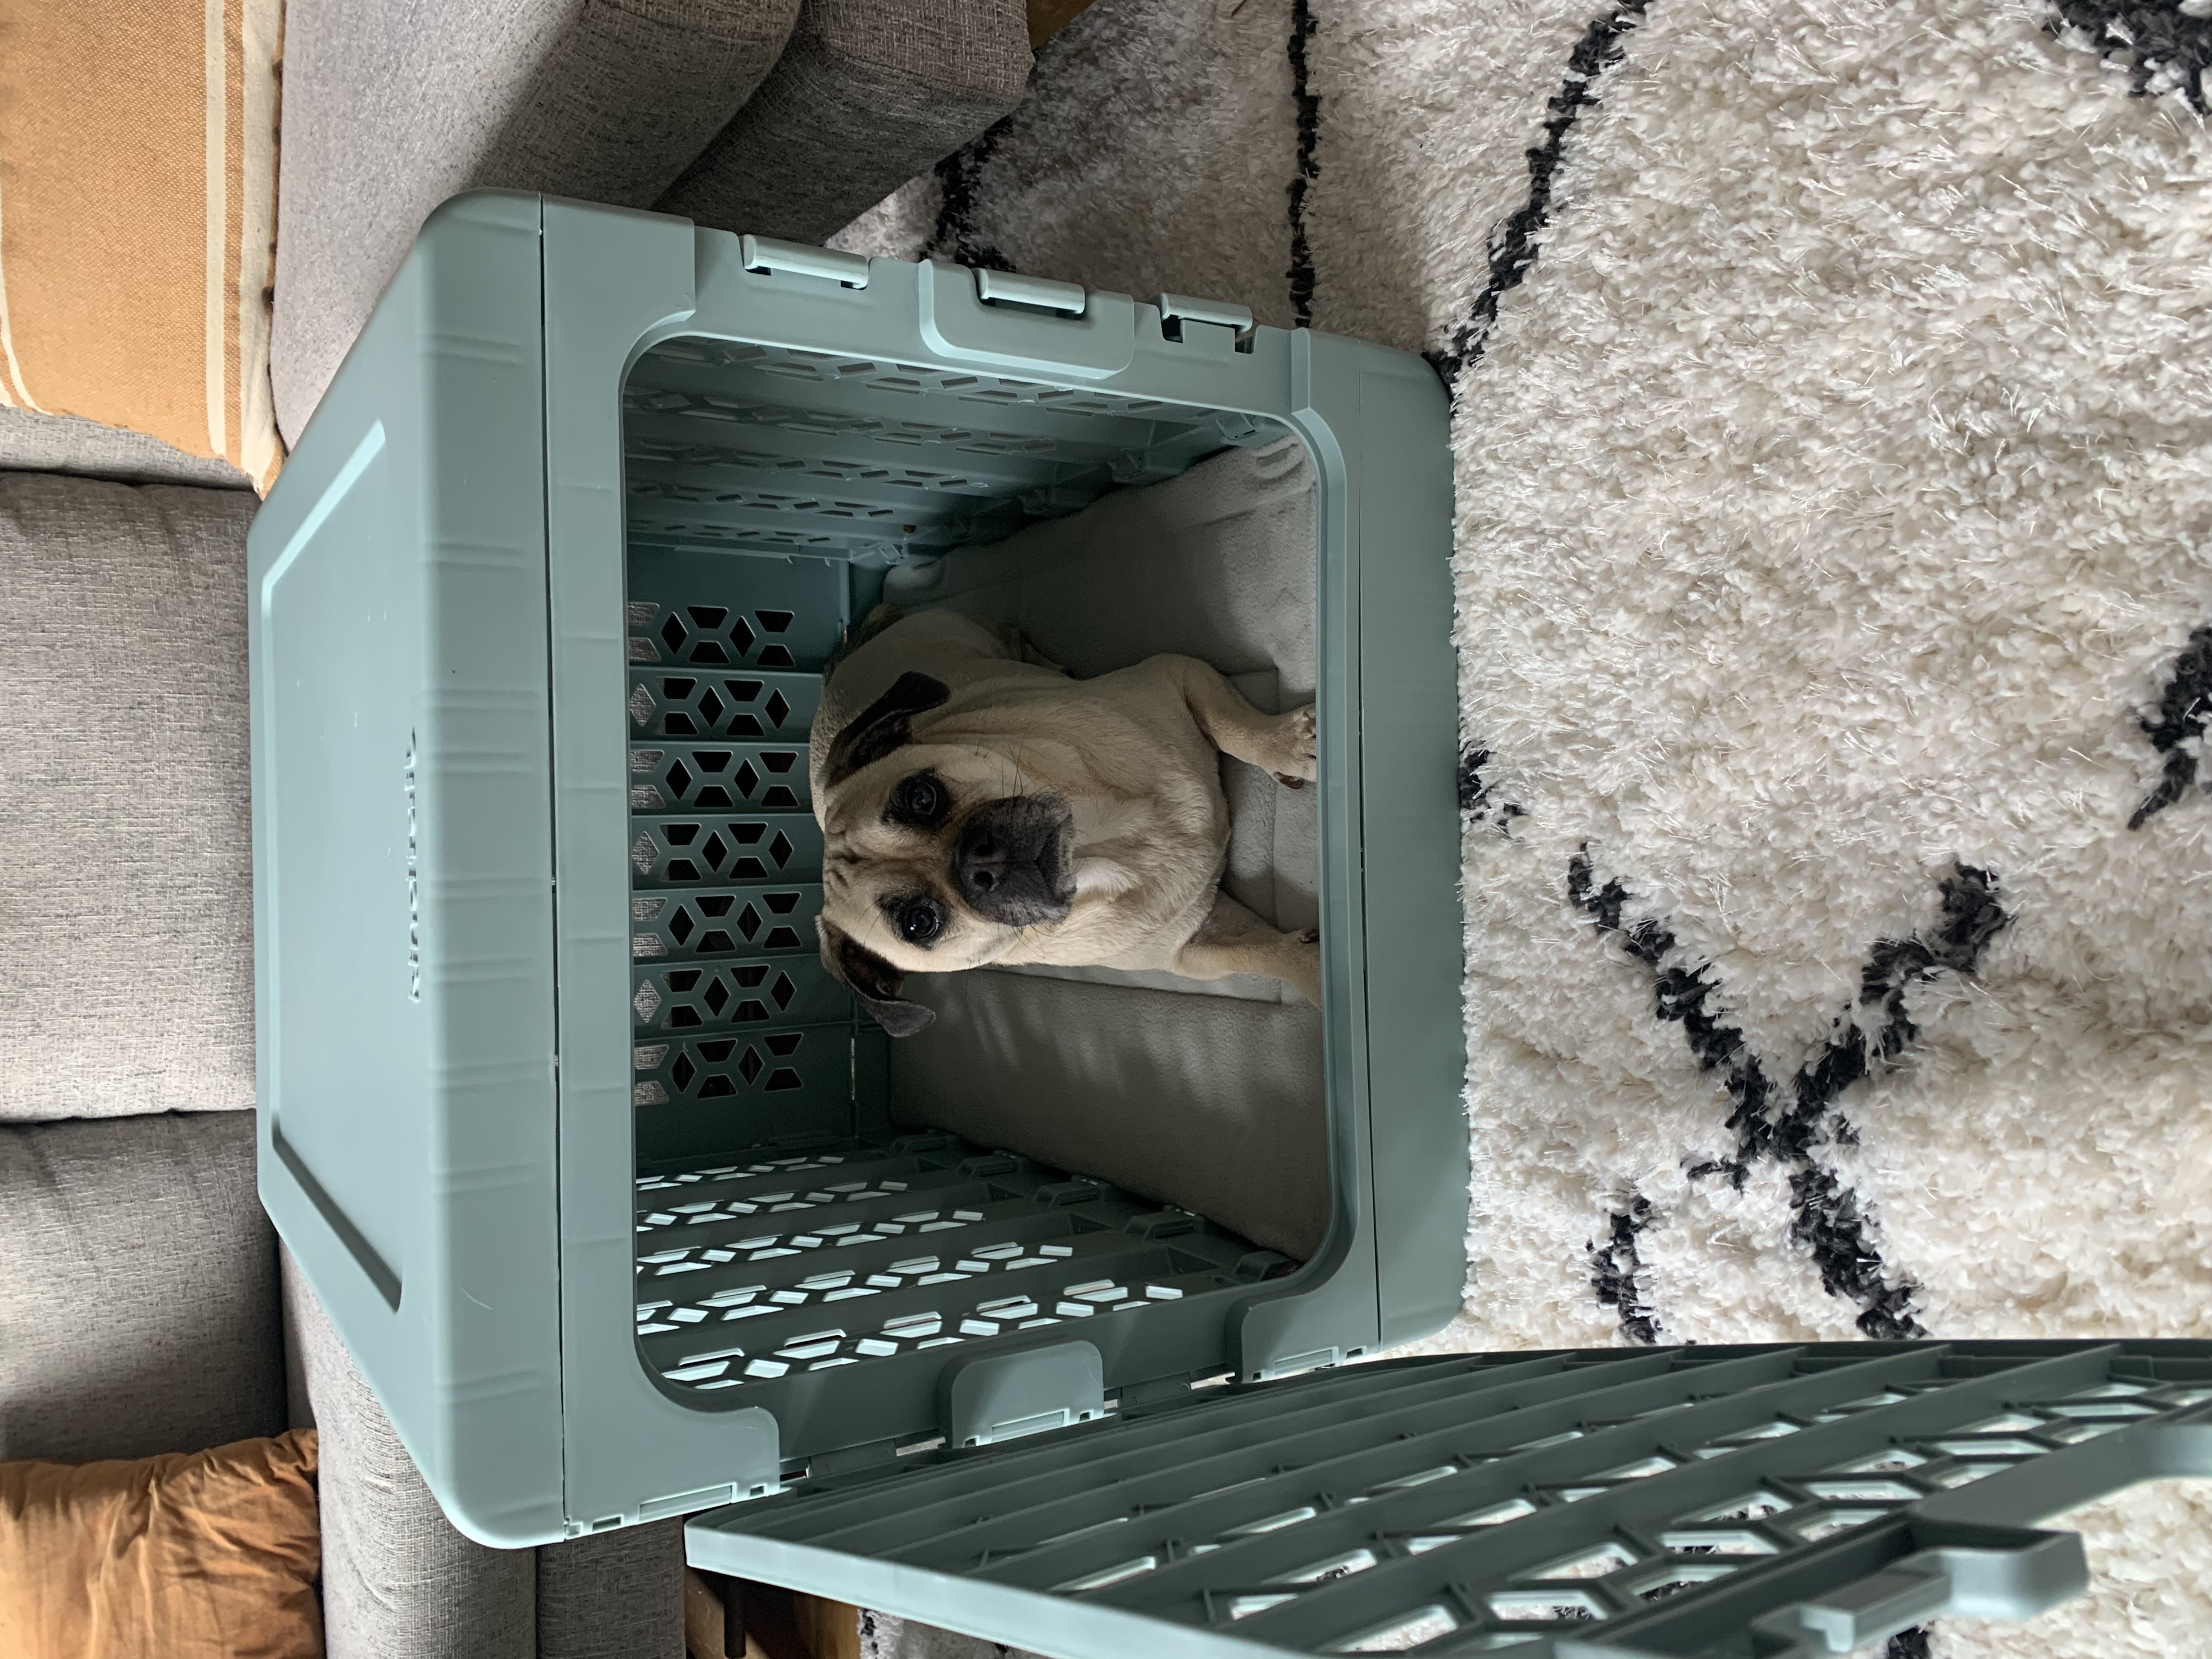 Cute puggle acclimating to his crate